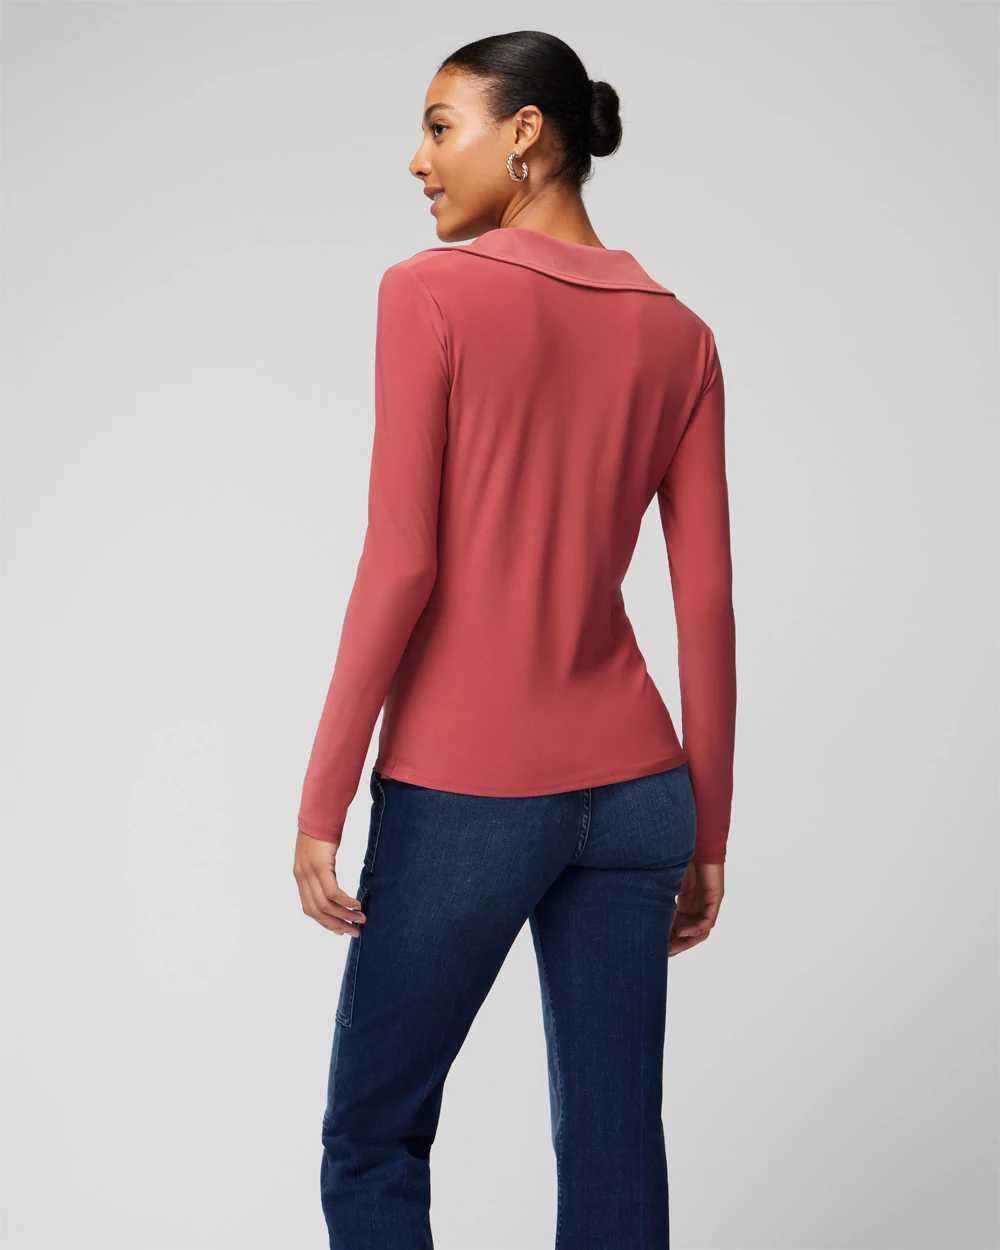 Collar Cowl Neck Long Sleeve Top click to view larger image.